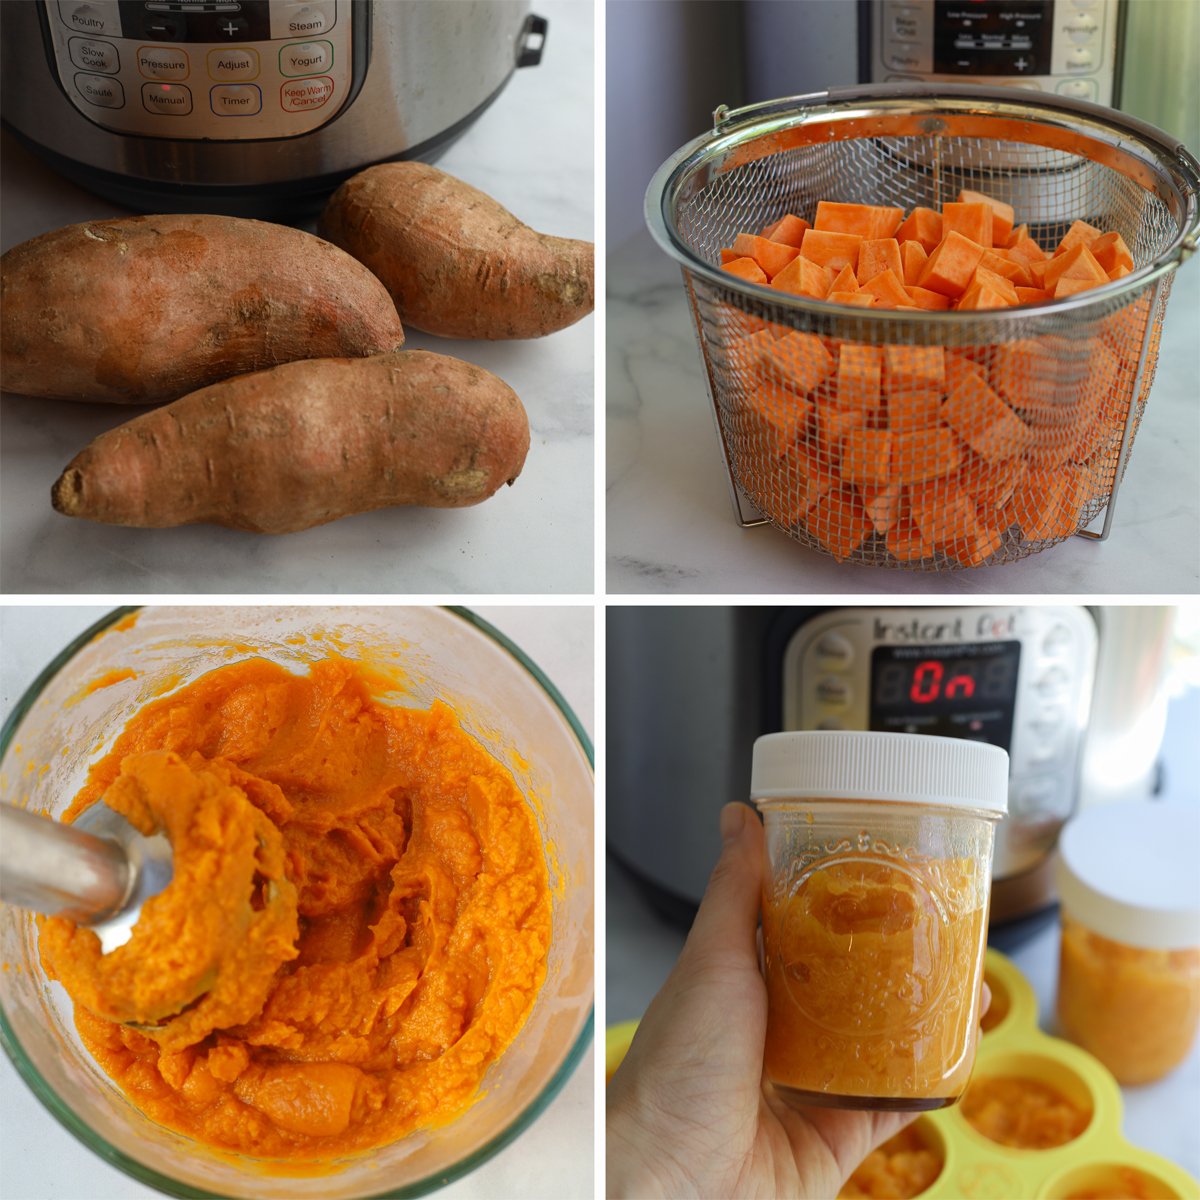 2x2 grid pictures. Upper Left square picture with yams. Upper Right square picture of cut up yams in basket. Lower left square picture immersion blender blending yams. Lower right square picture of mason jar with puree yams. 